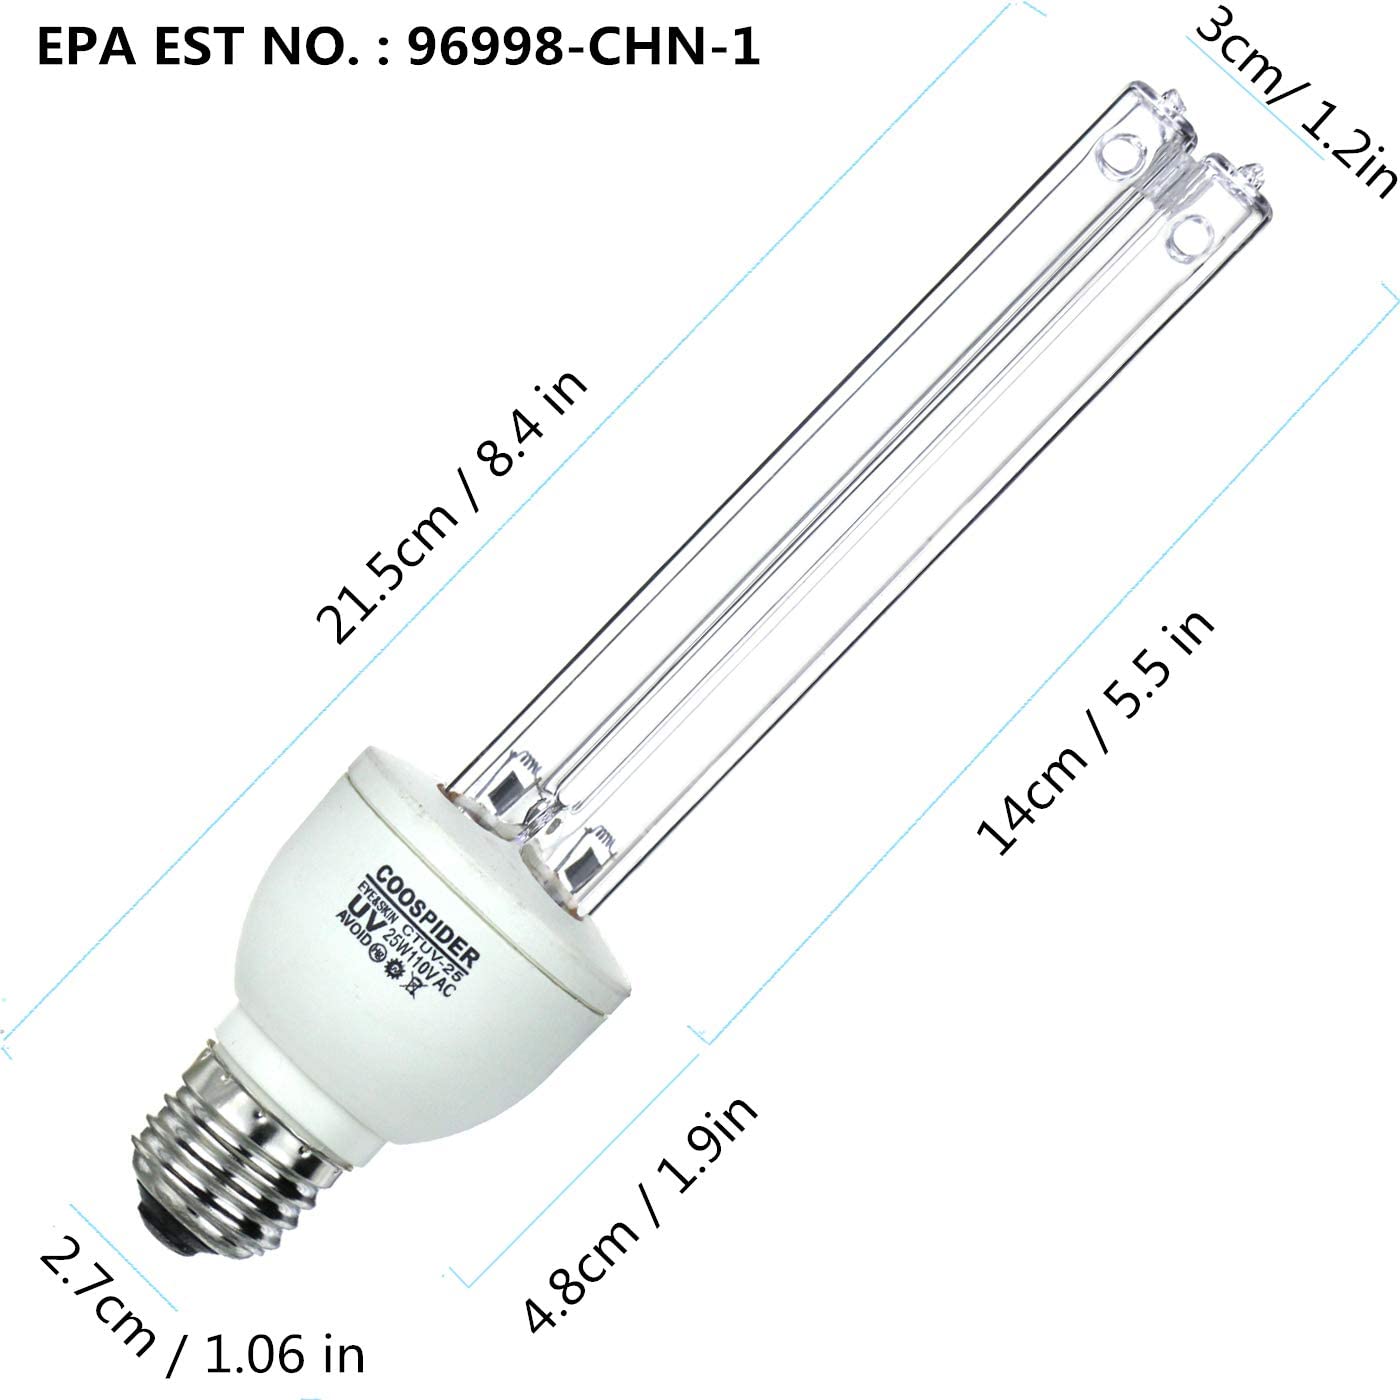 UV 25W E26 110V Germicidal Light UVC Bulb Timer  Base, Used for Remove Musty, Covers up to 400sq.ft (Ozone-free CTUV-25）